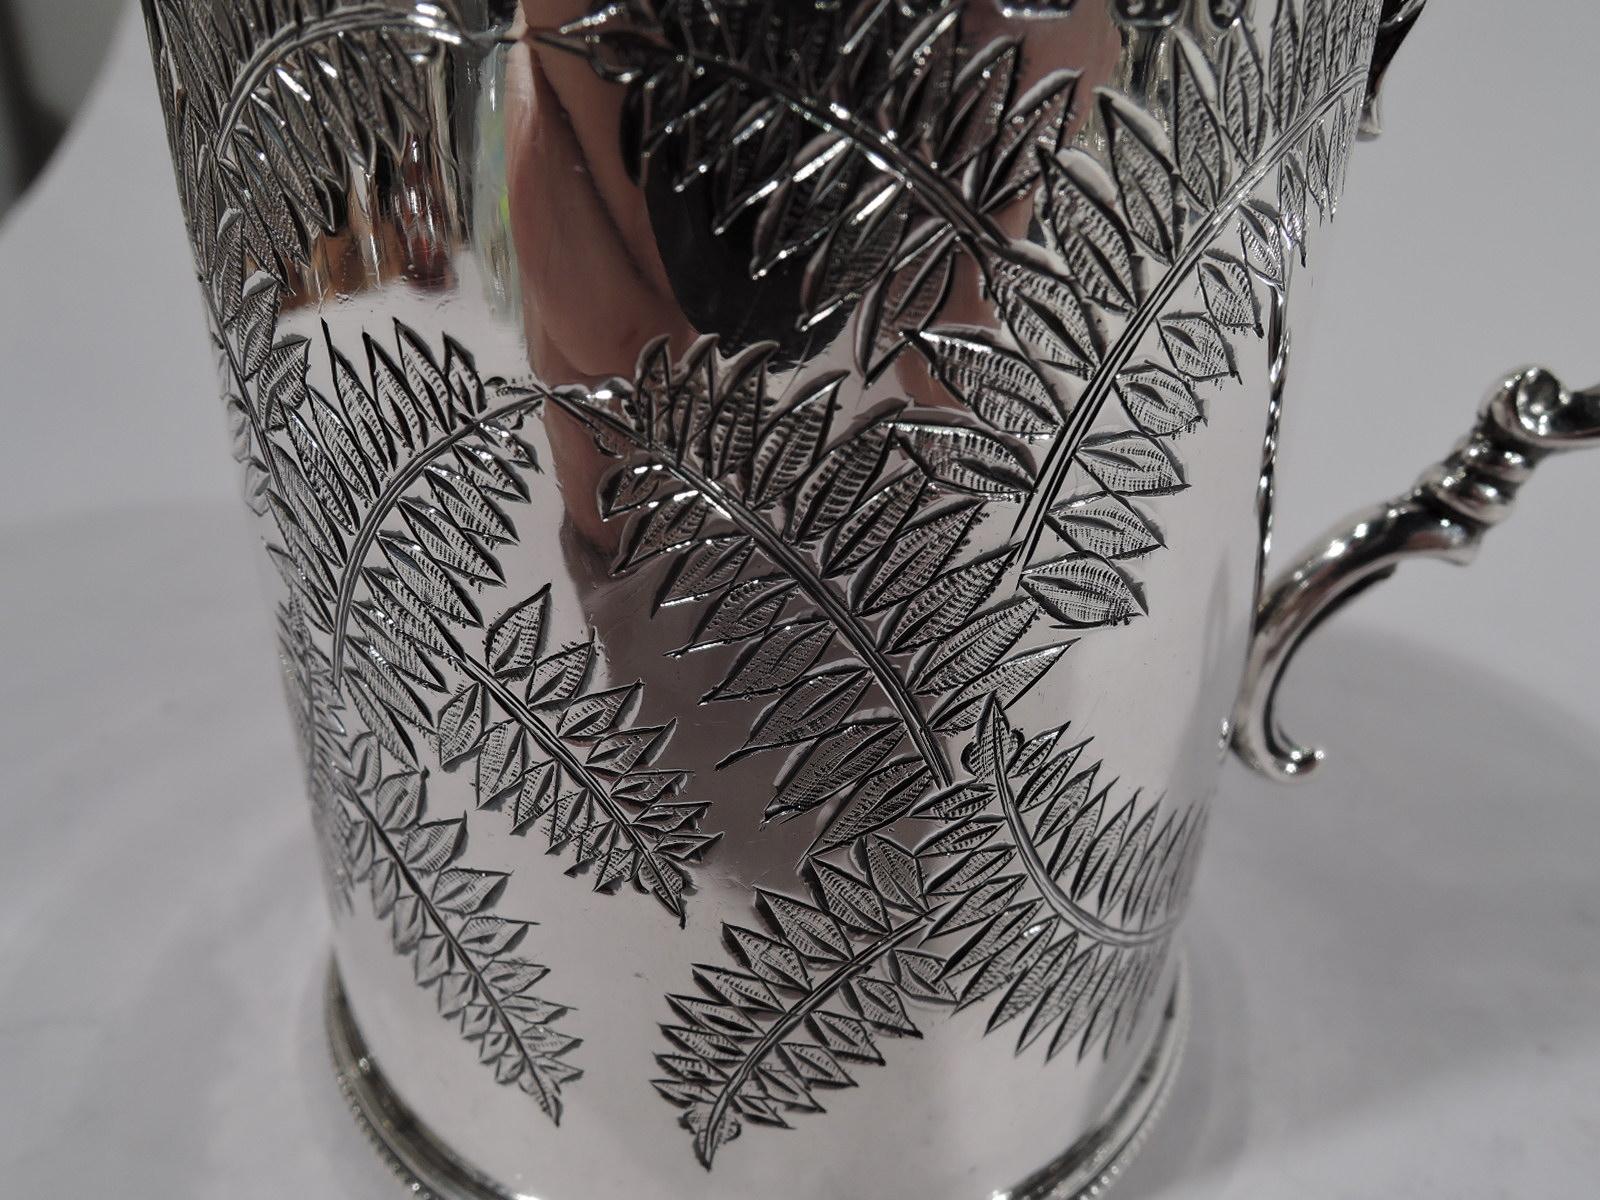 Late 19th Century Antique English Victorian Aesthetic Sterling Silver Baby Cup